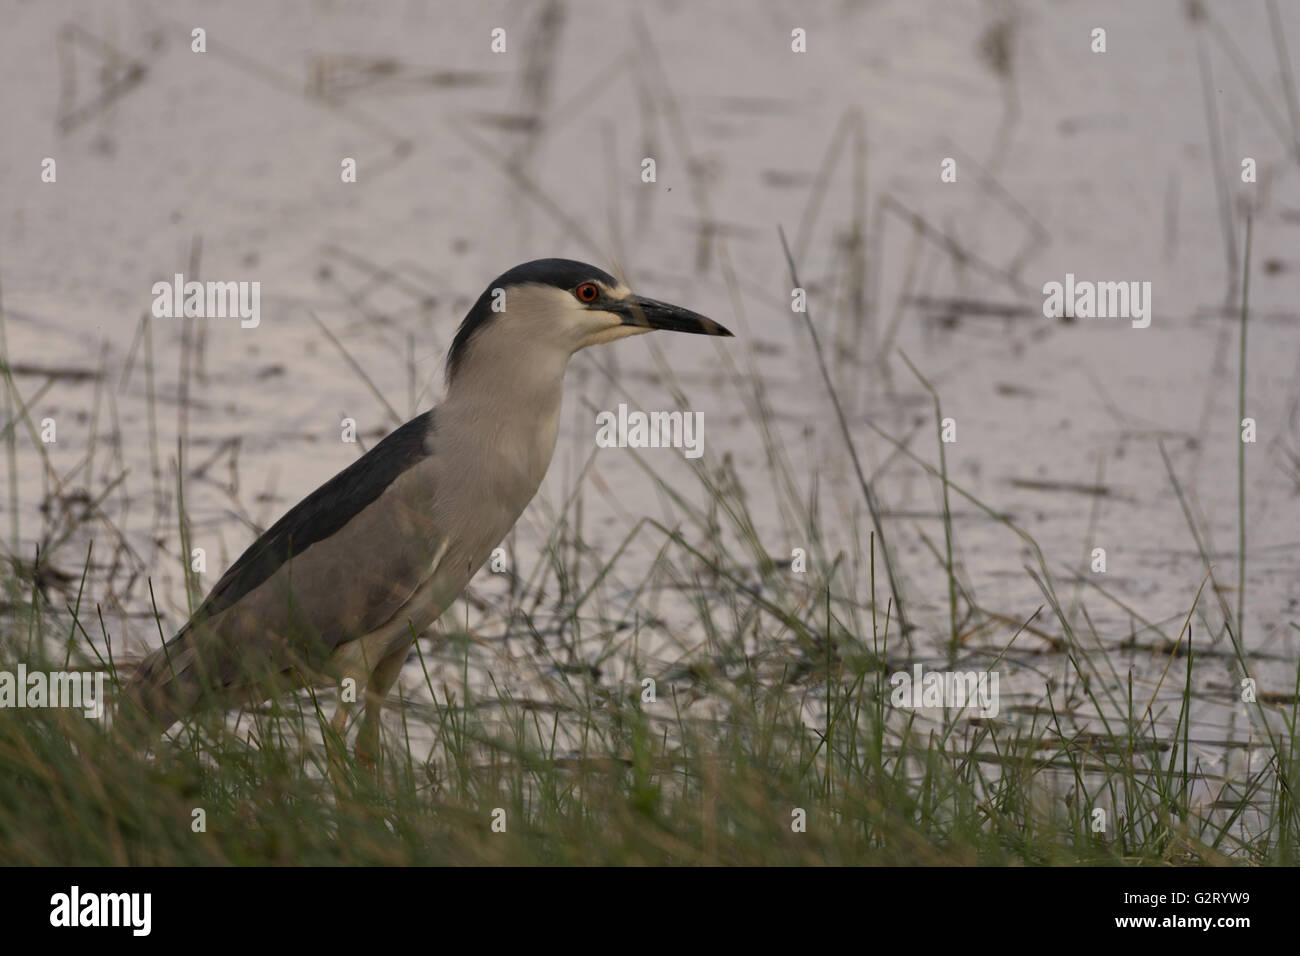 Black-crowned Night Heron, (Nycticorax nycticorax), Bosque del Apache National Wildlife Refuge, New Mexico, USA. Stock Photo